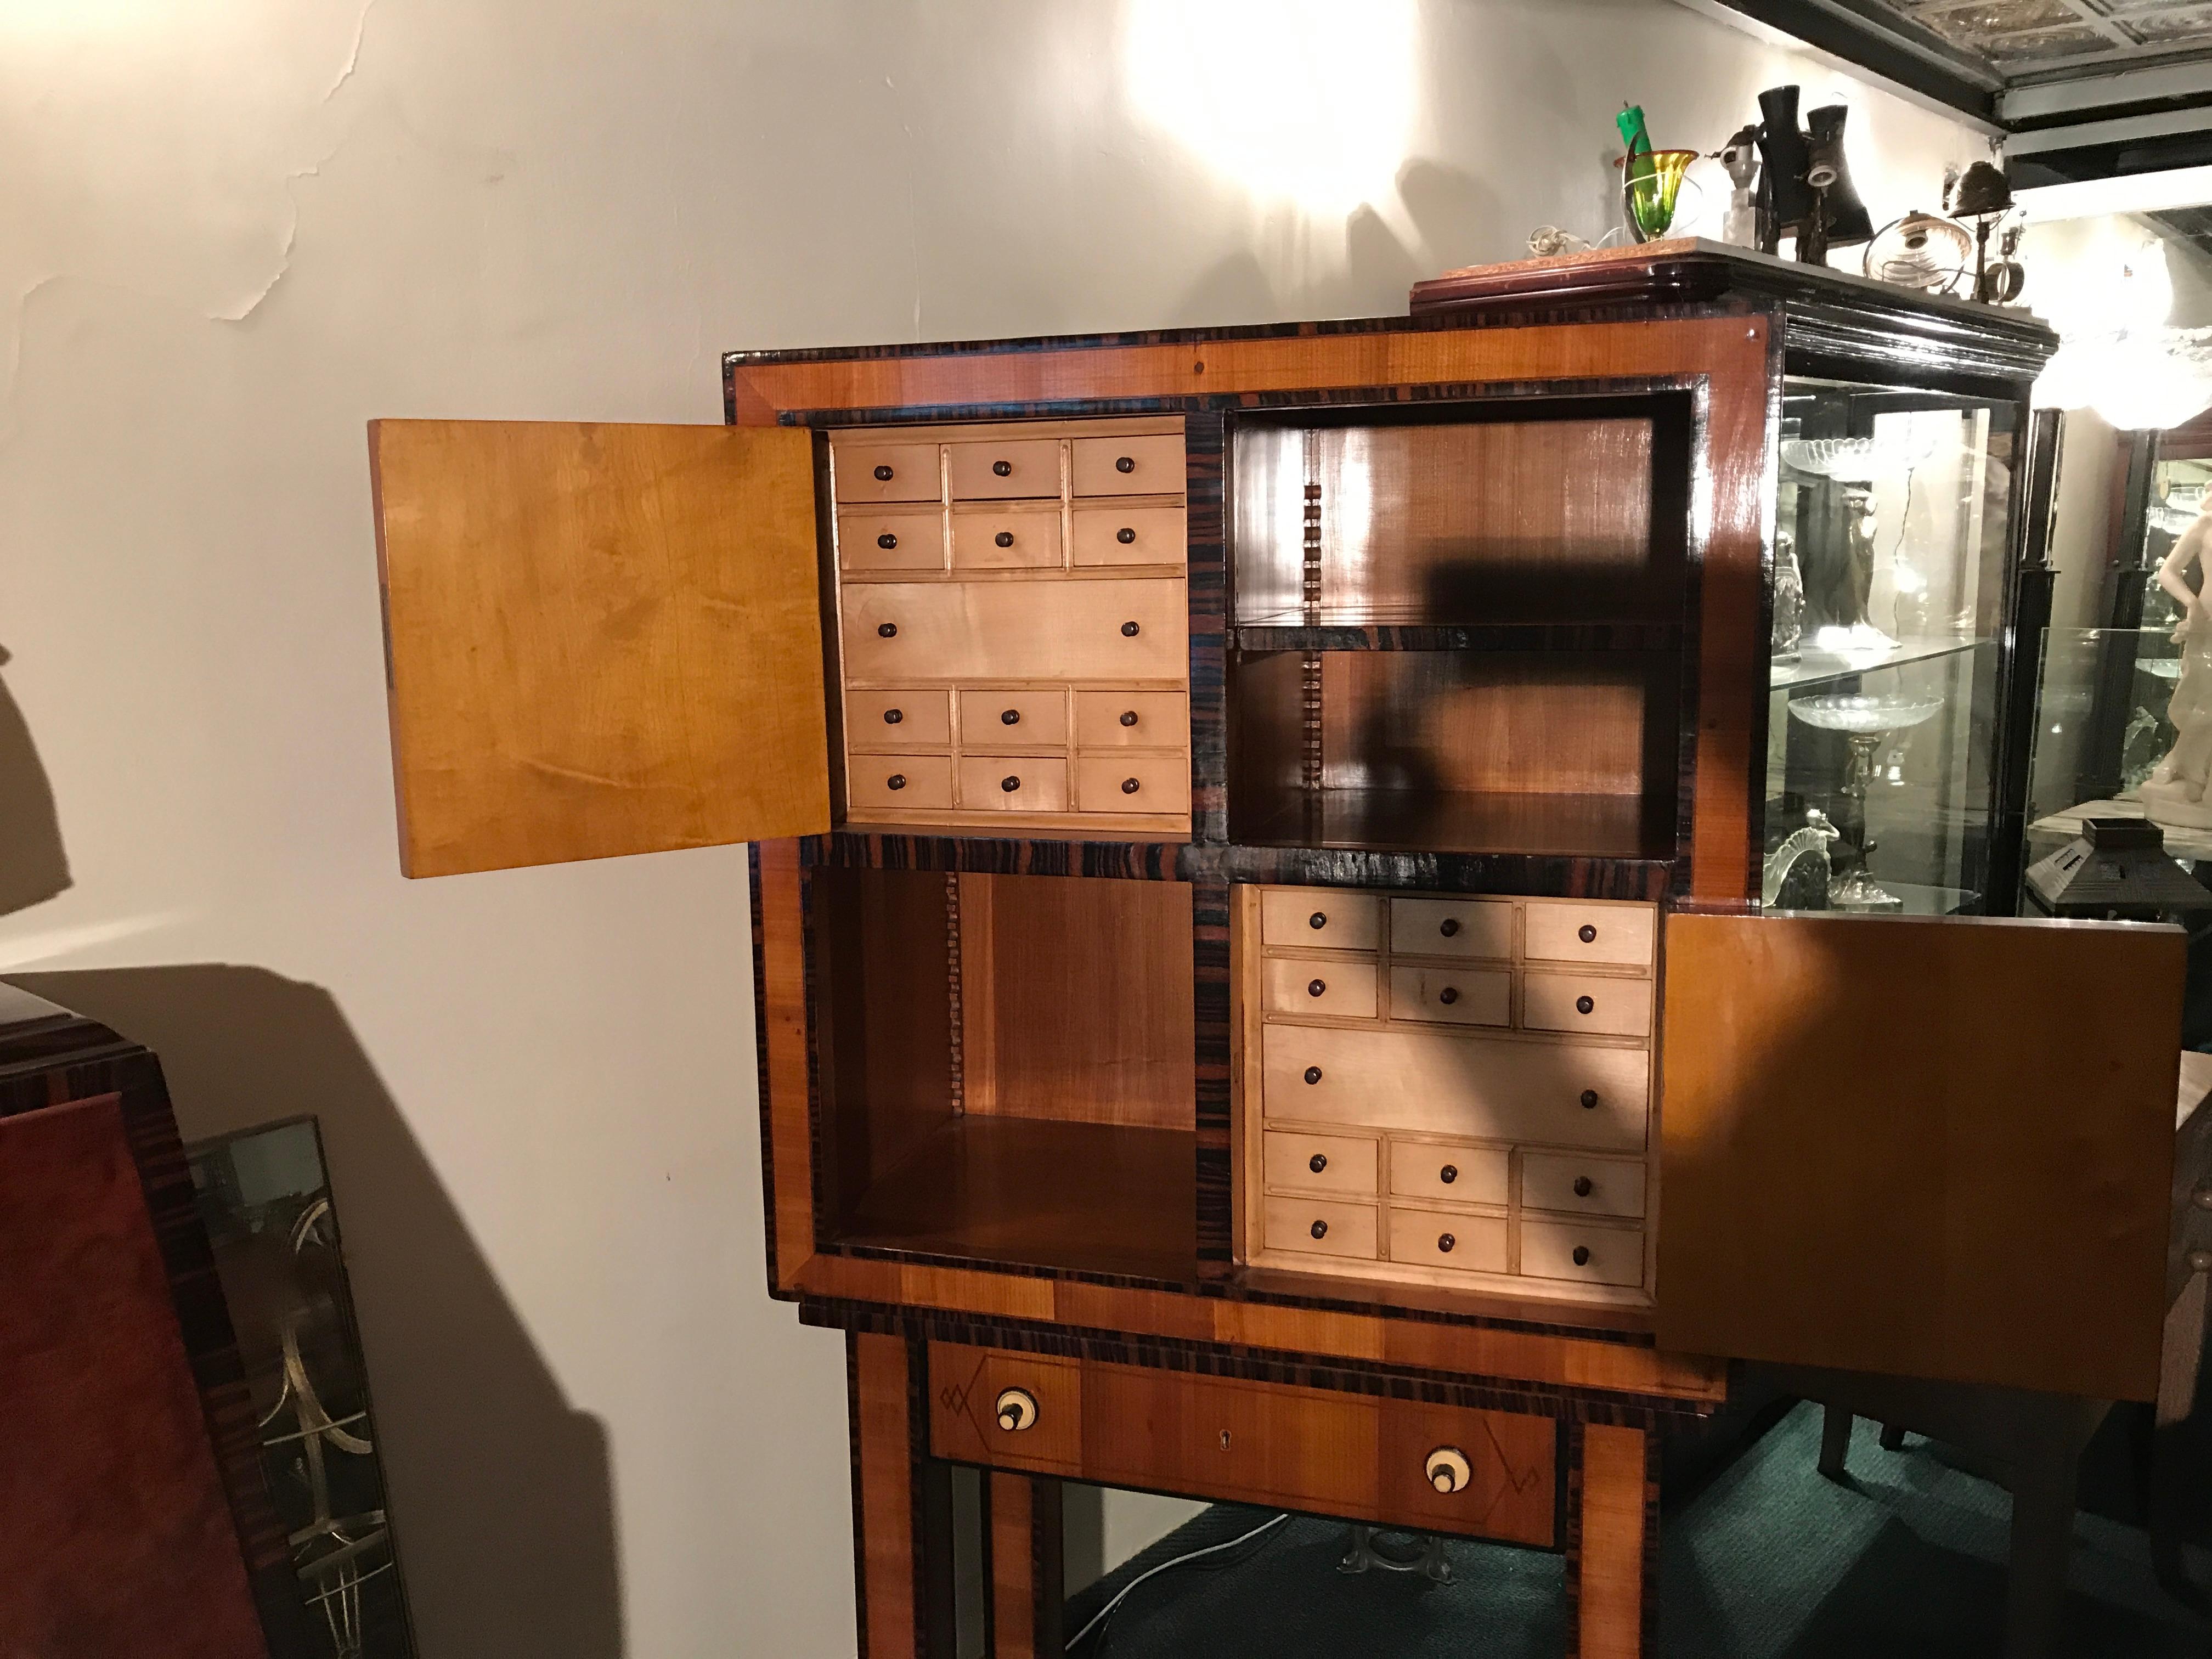 Early 20th Century Furniture for Havana Cigars, Puros, Attributed to Koloman Moser and Werkstatte For Sale